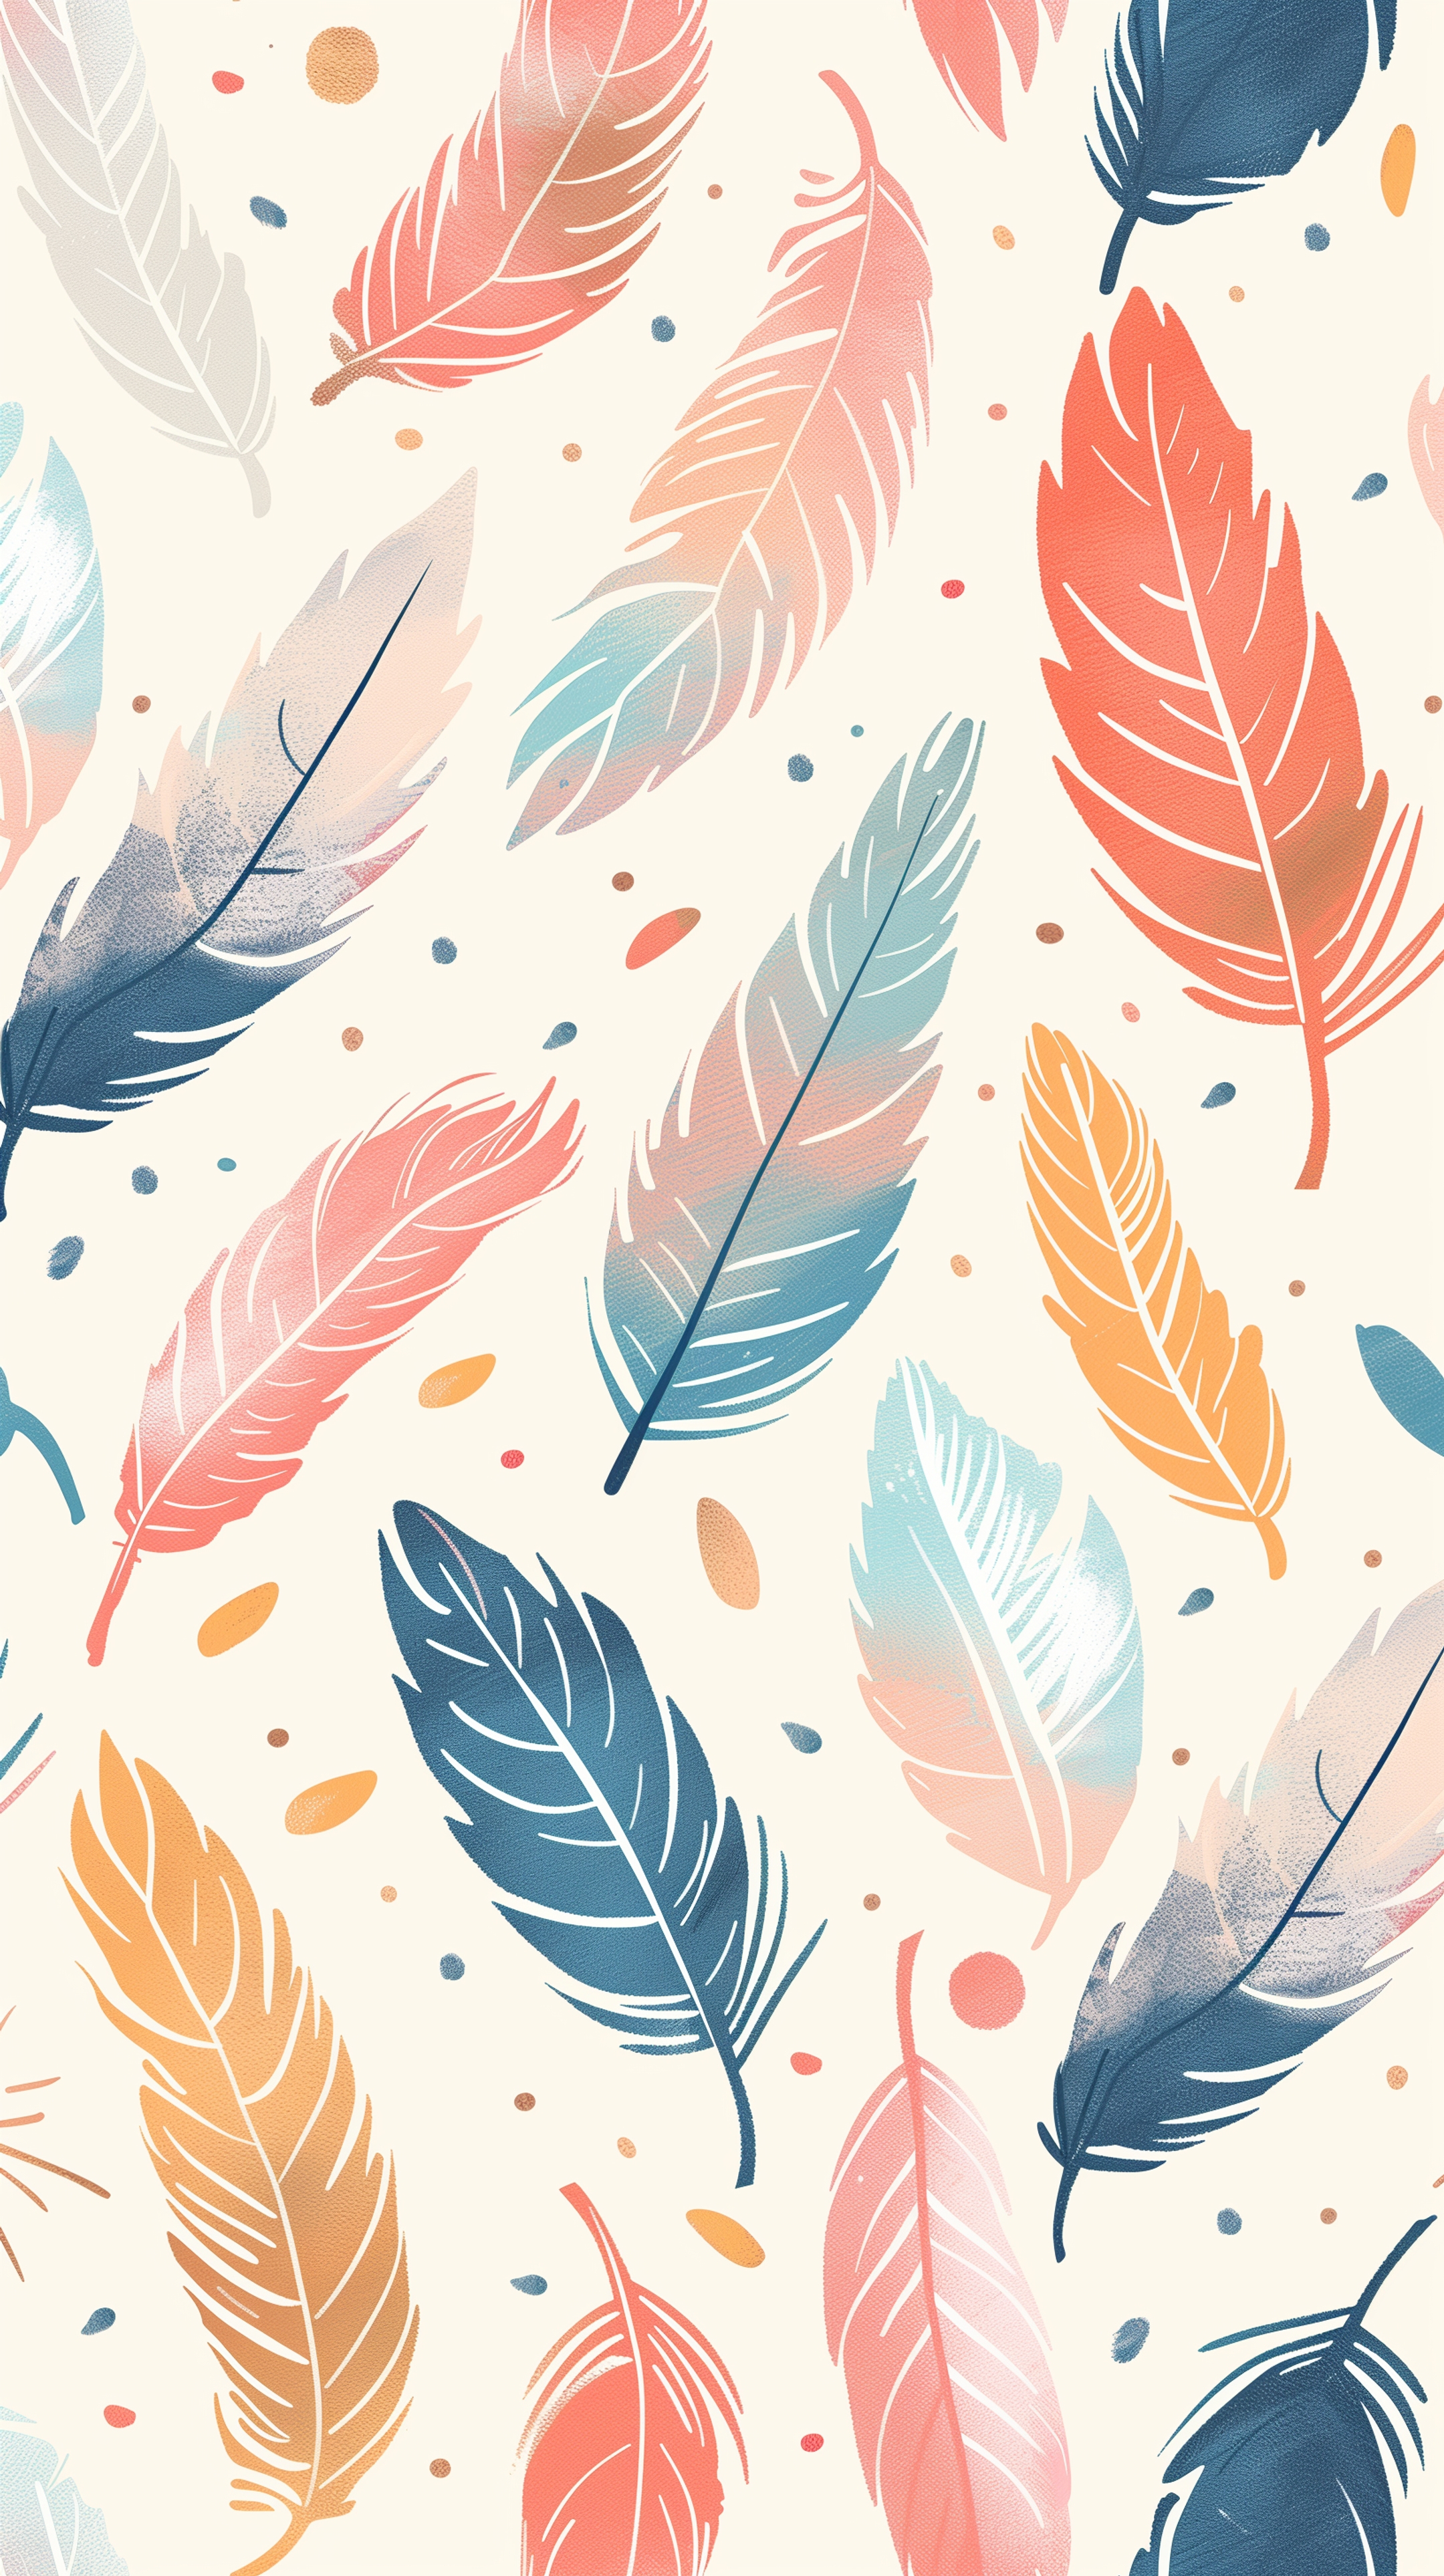 Colorful Feathers Design for Kids Tapeta[385f1366577146a2b959]